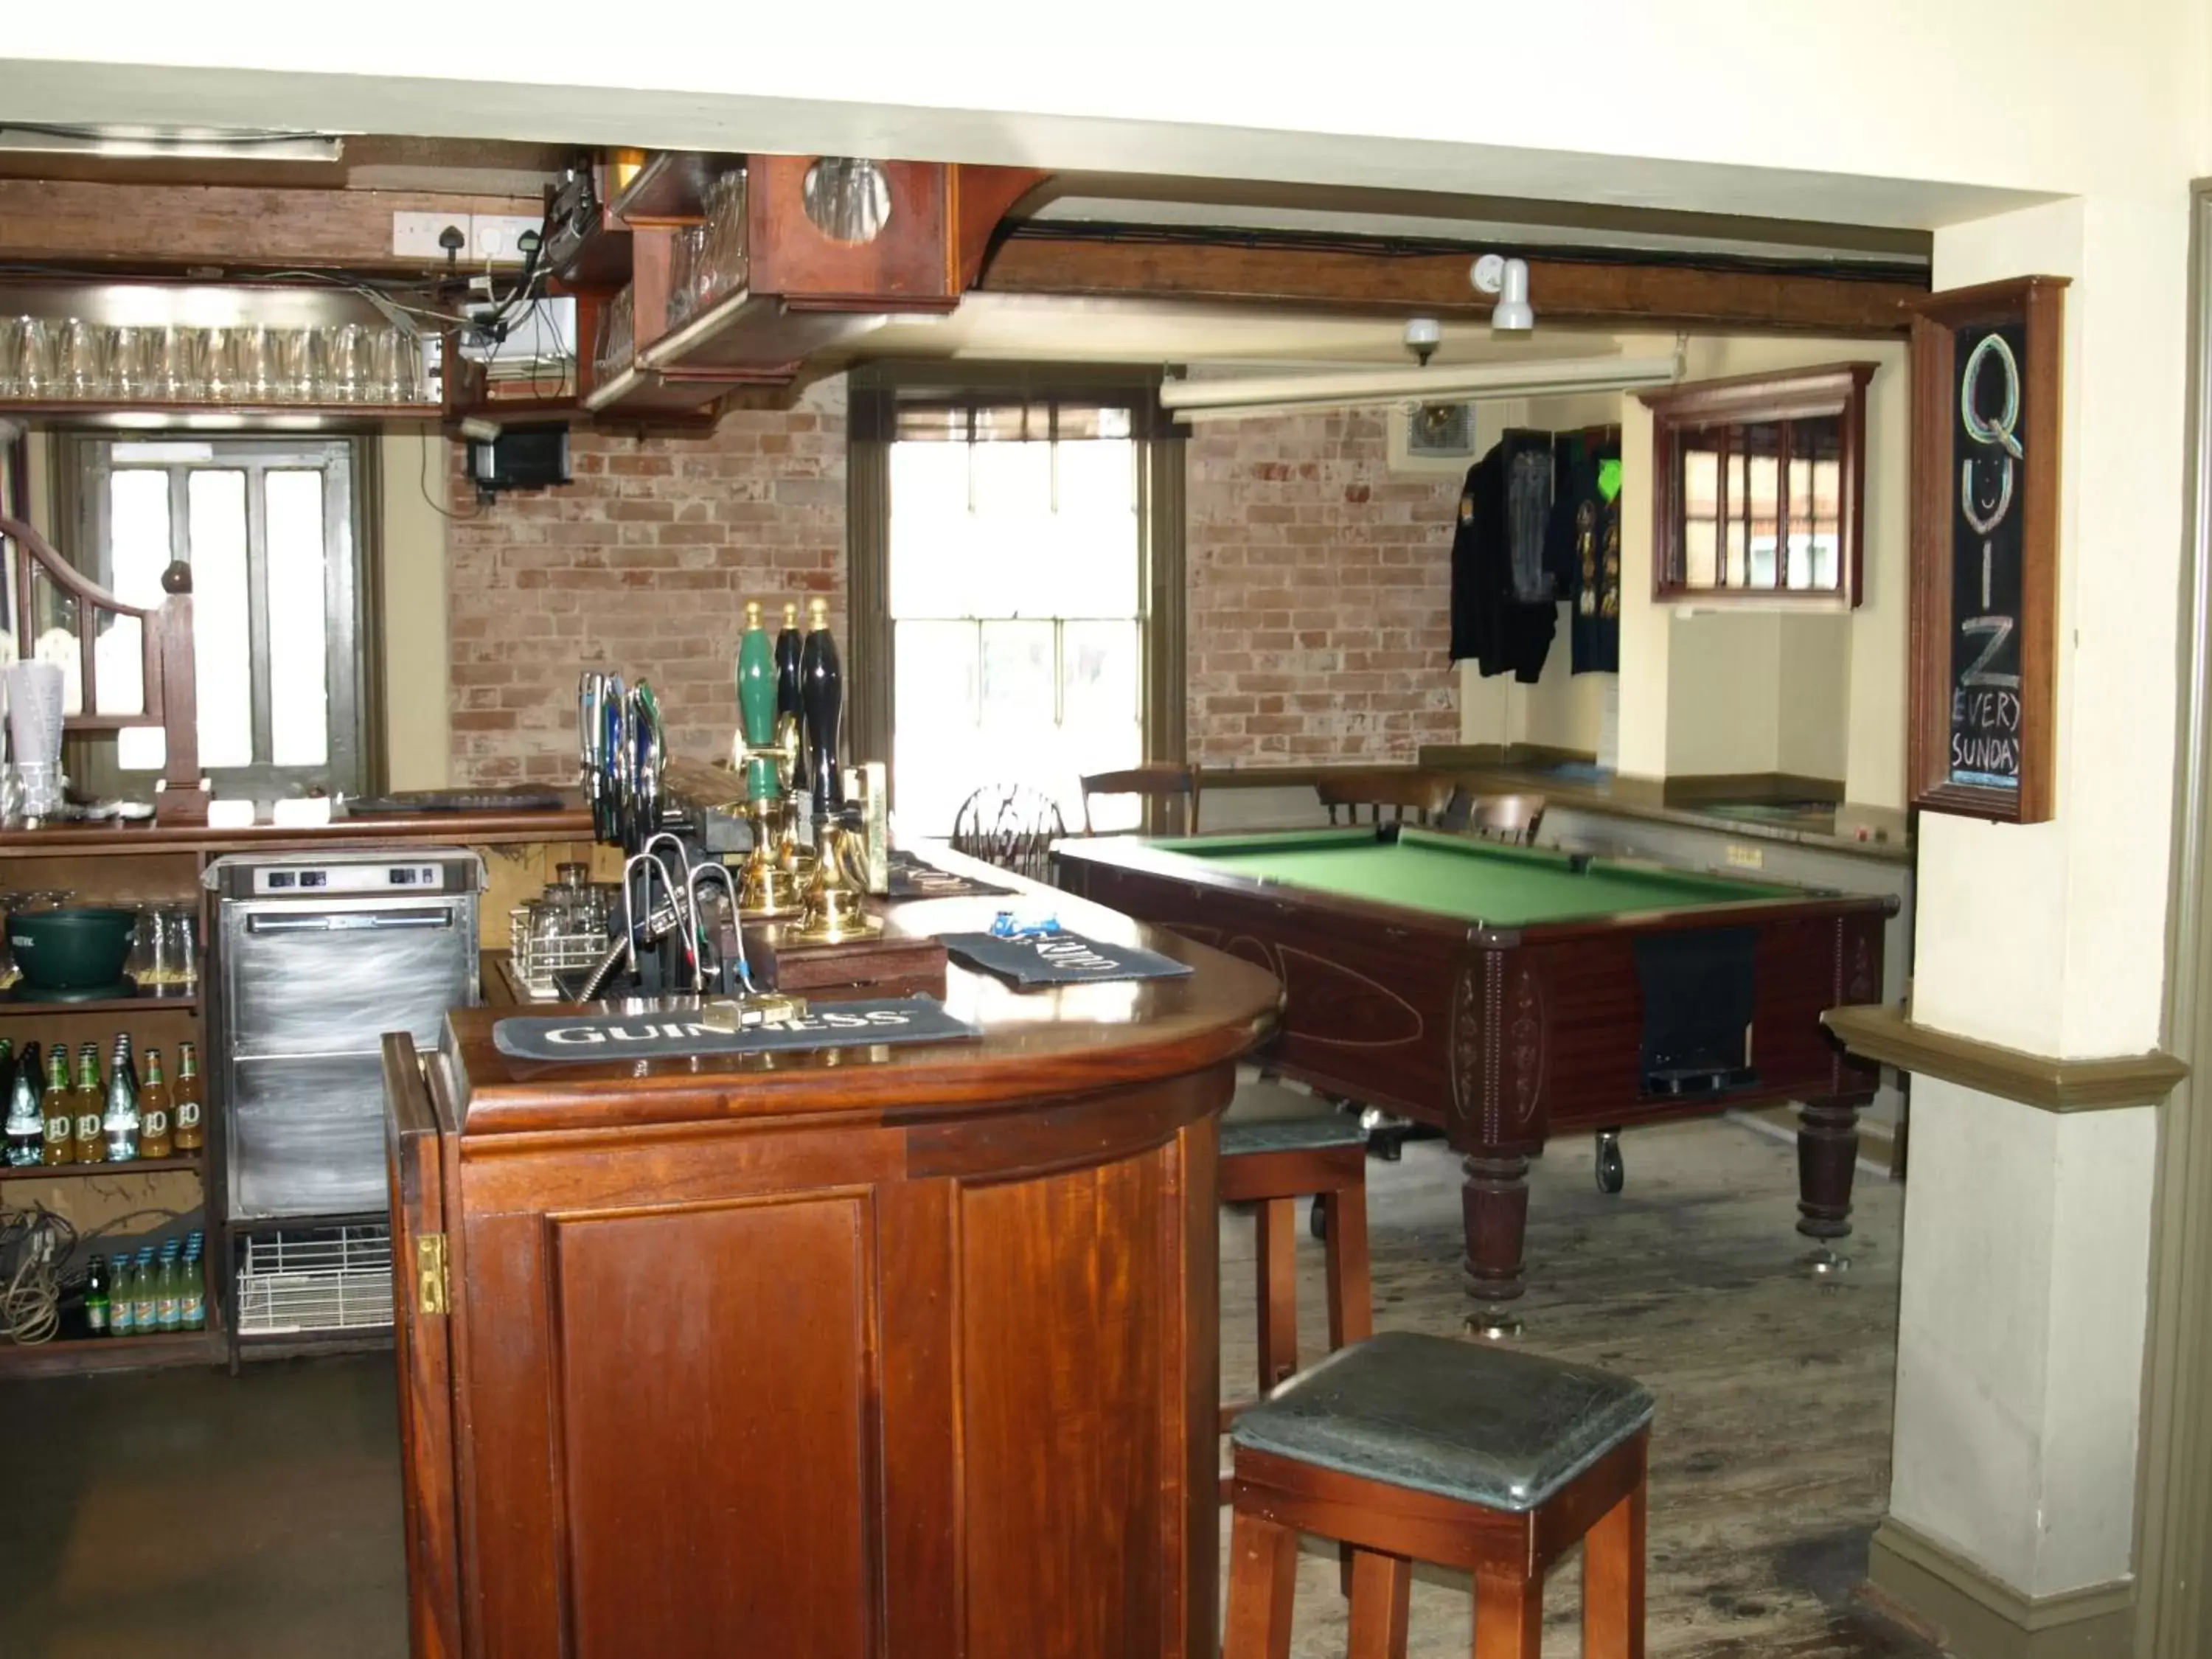 Day, Billiards in Jolly Brewers Free House Inn